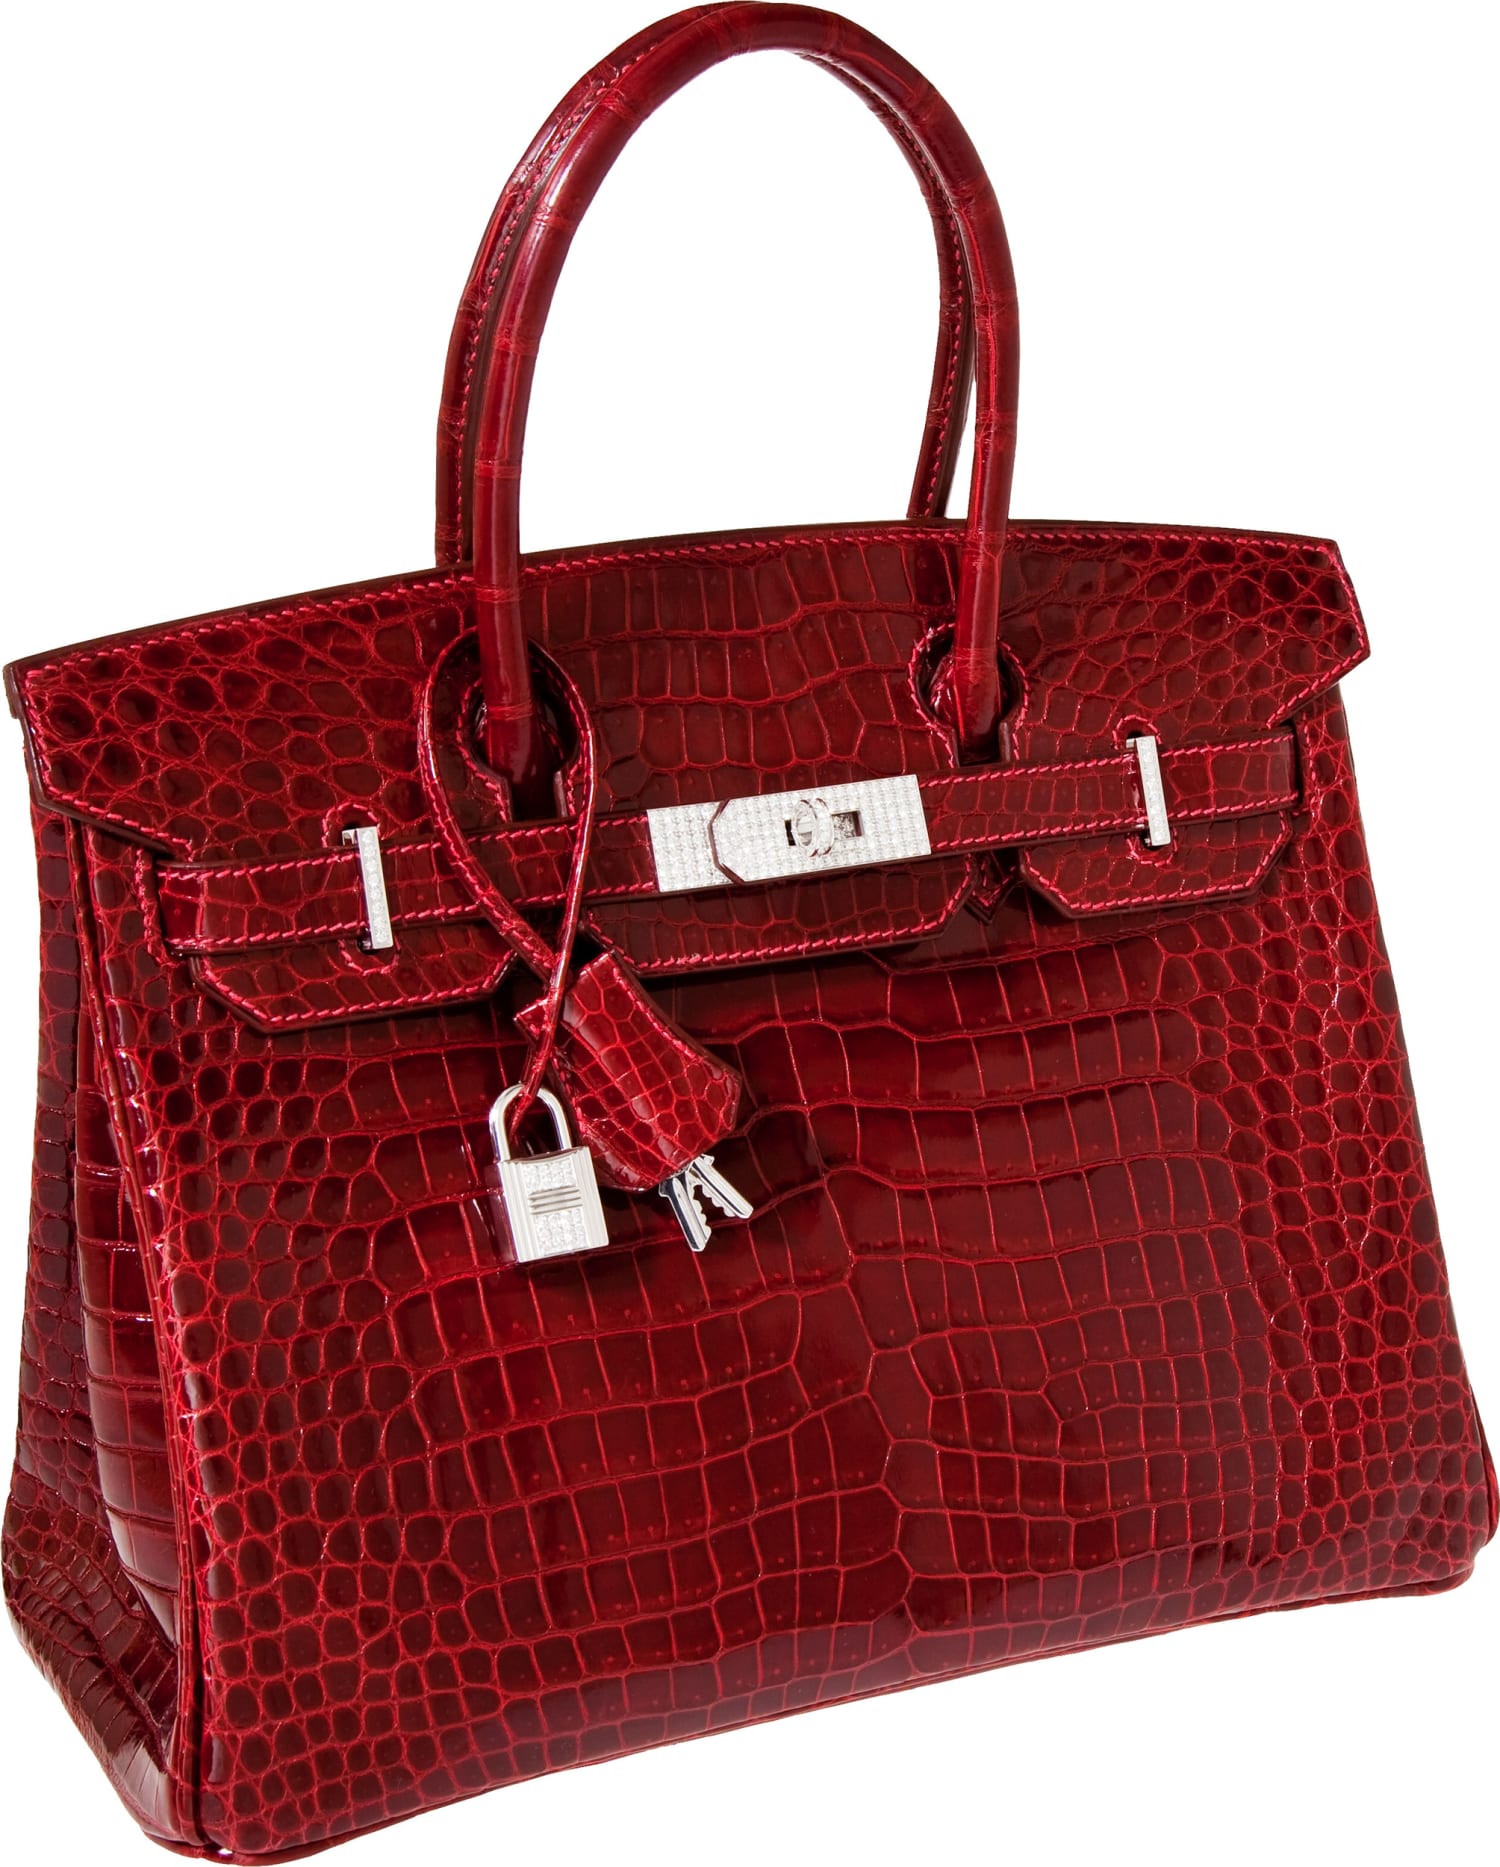 Hermes birkin bag better investment than gold - pictures & news